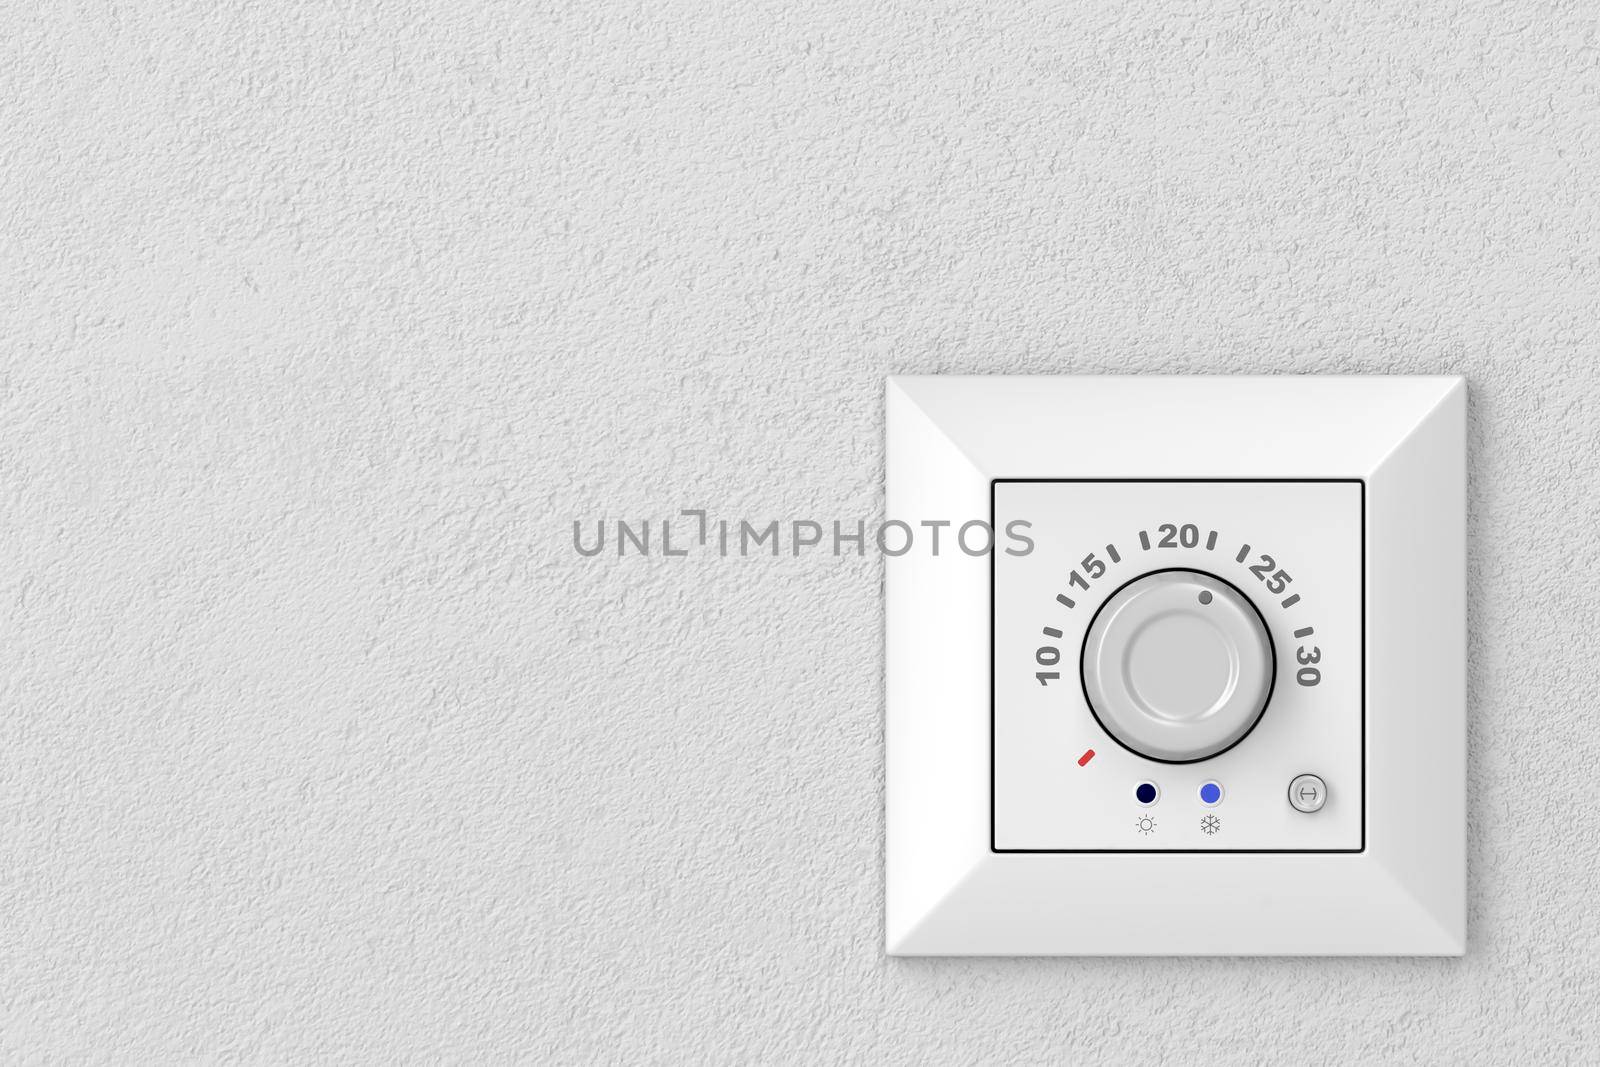 Air conditioner control panel (thermostat) on a gray wall